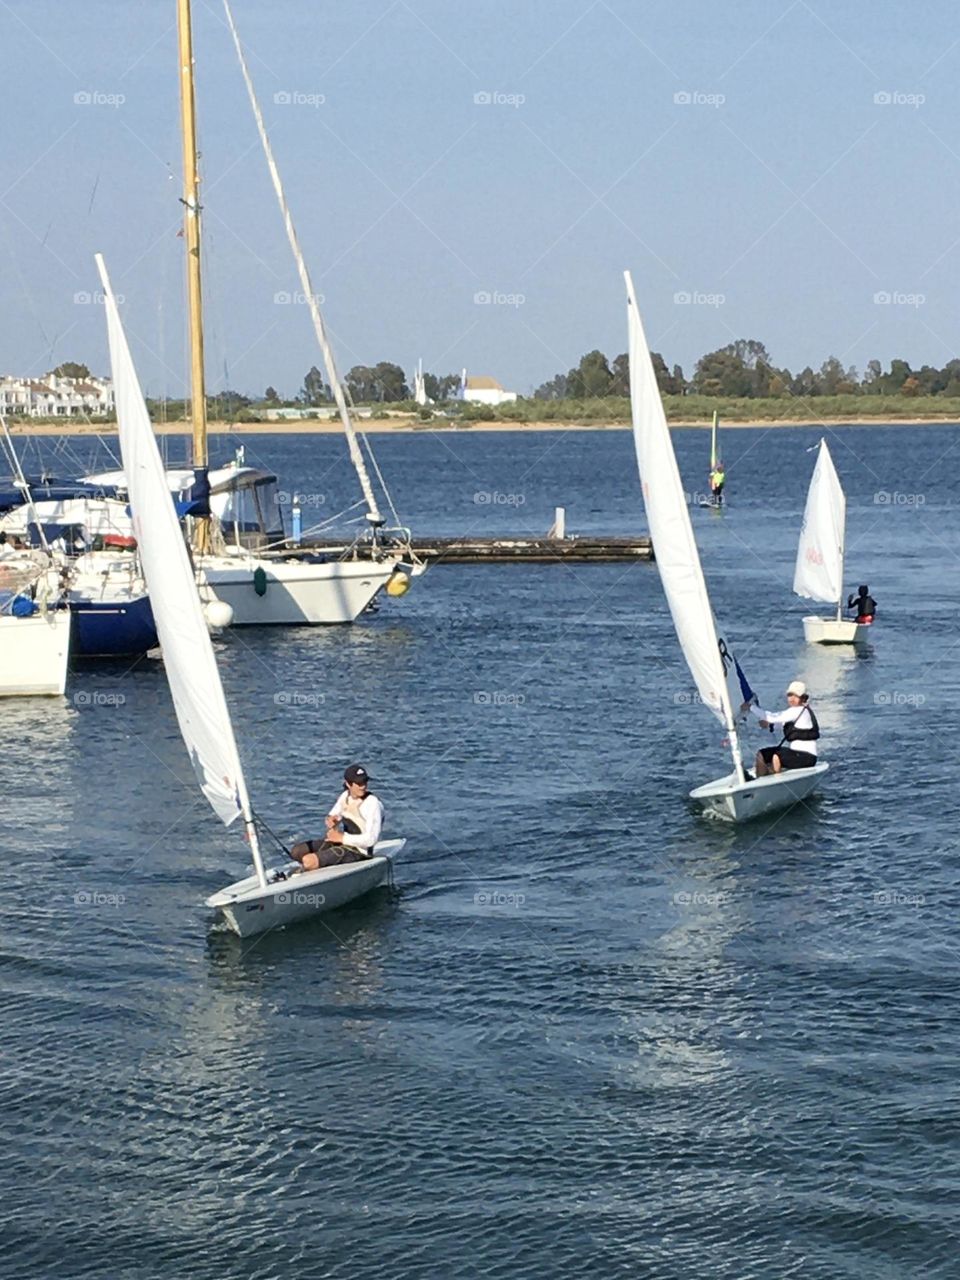 Summertime : season for sailing by a sunny day